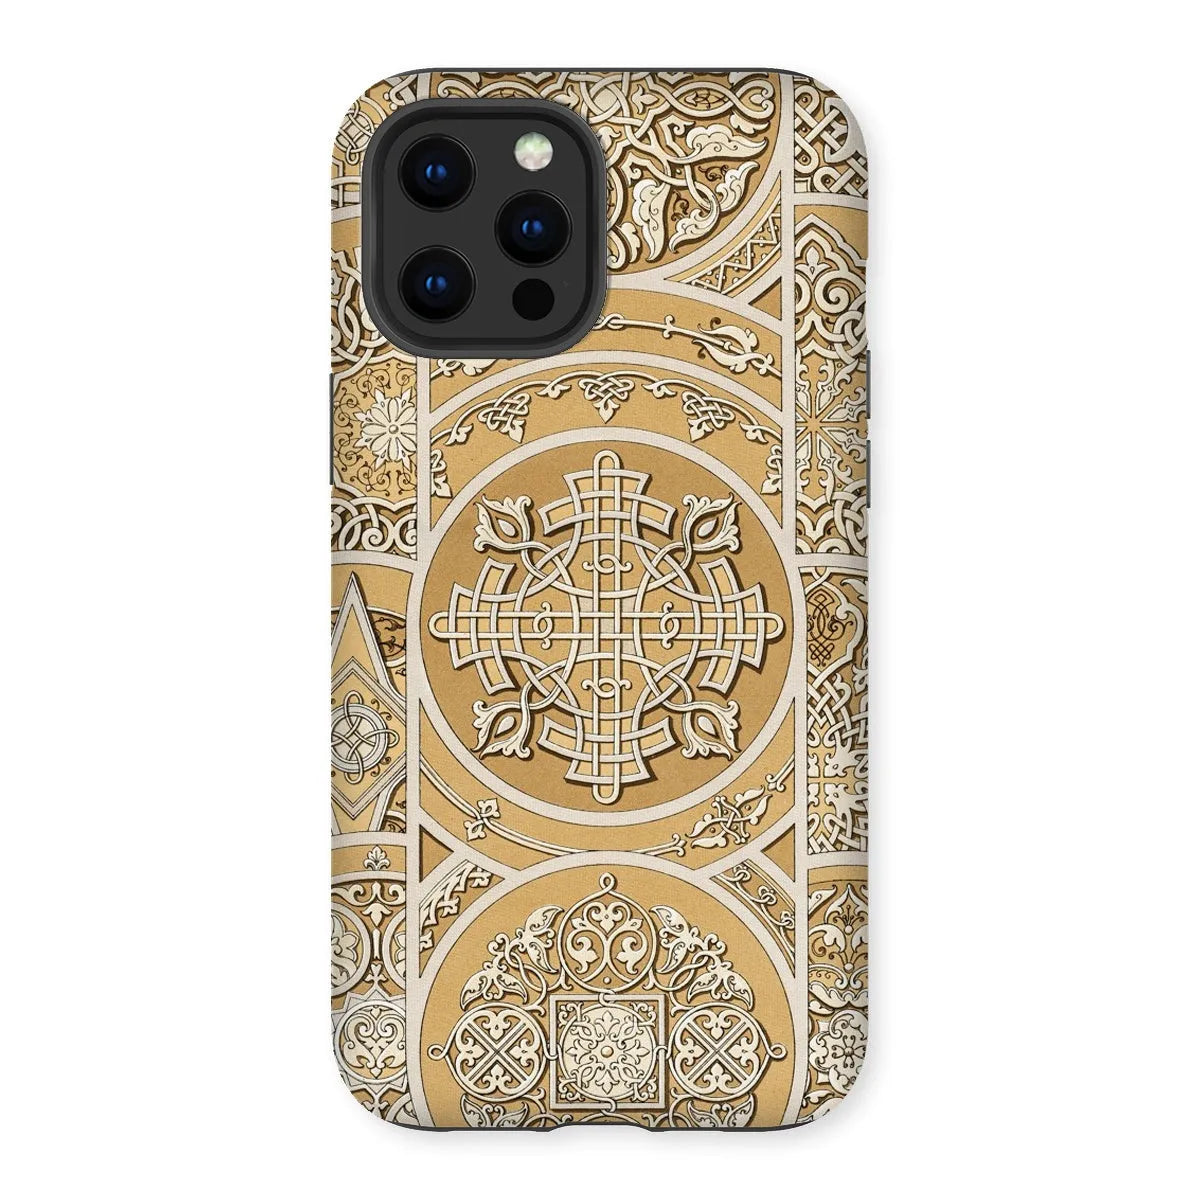 Russian Pattern By Auguste Racinet Tough Phone Case - Iphone 12 Pro Max / Matte - Mobile Phone Cases - Aesthetic Art